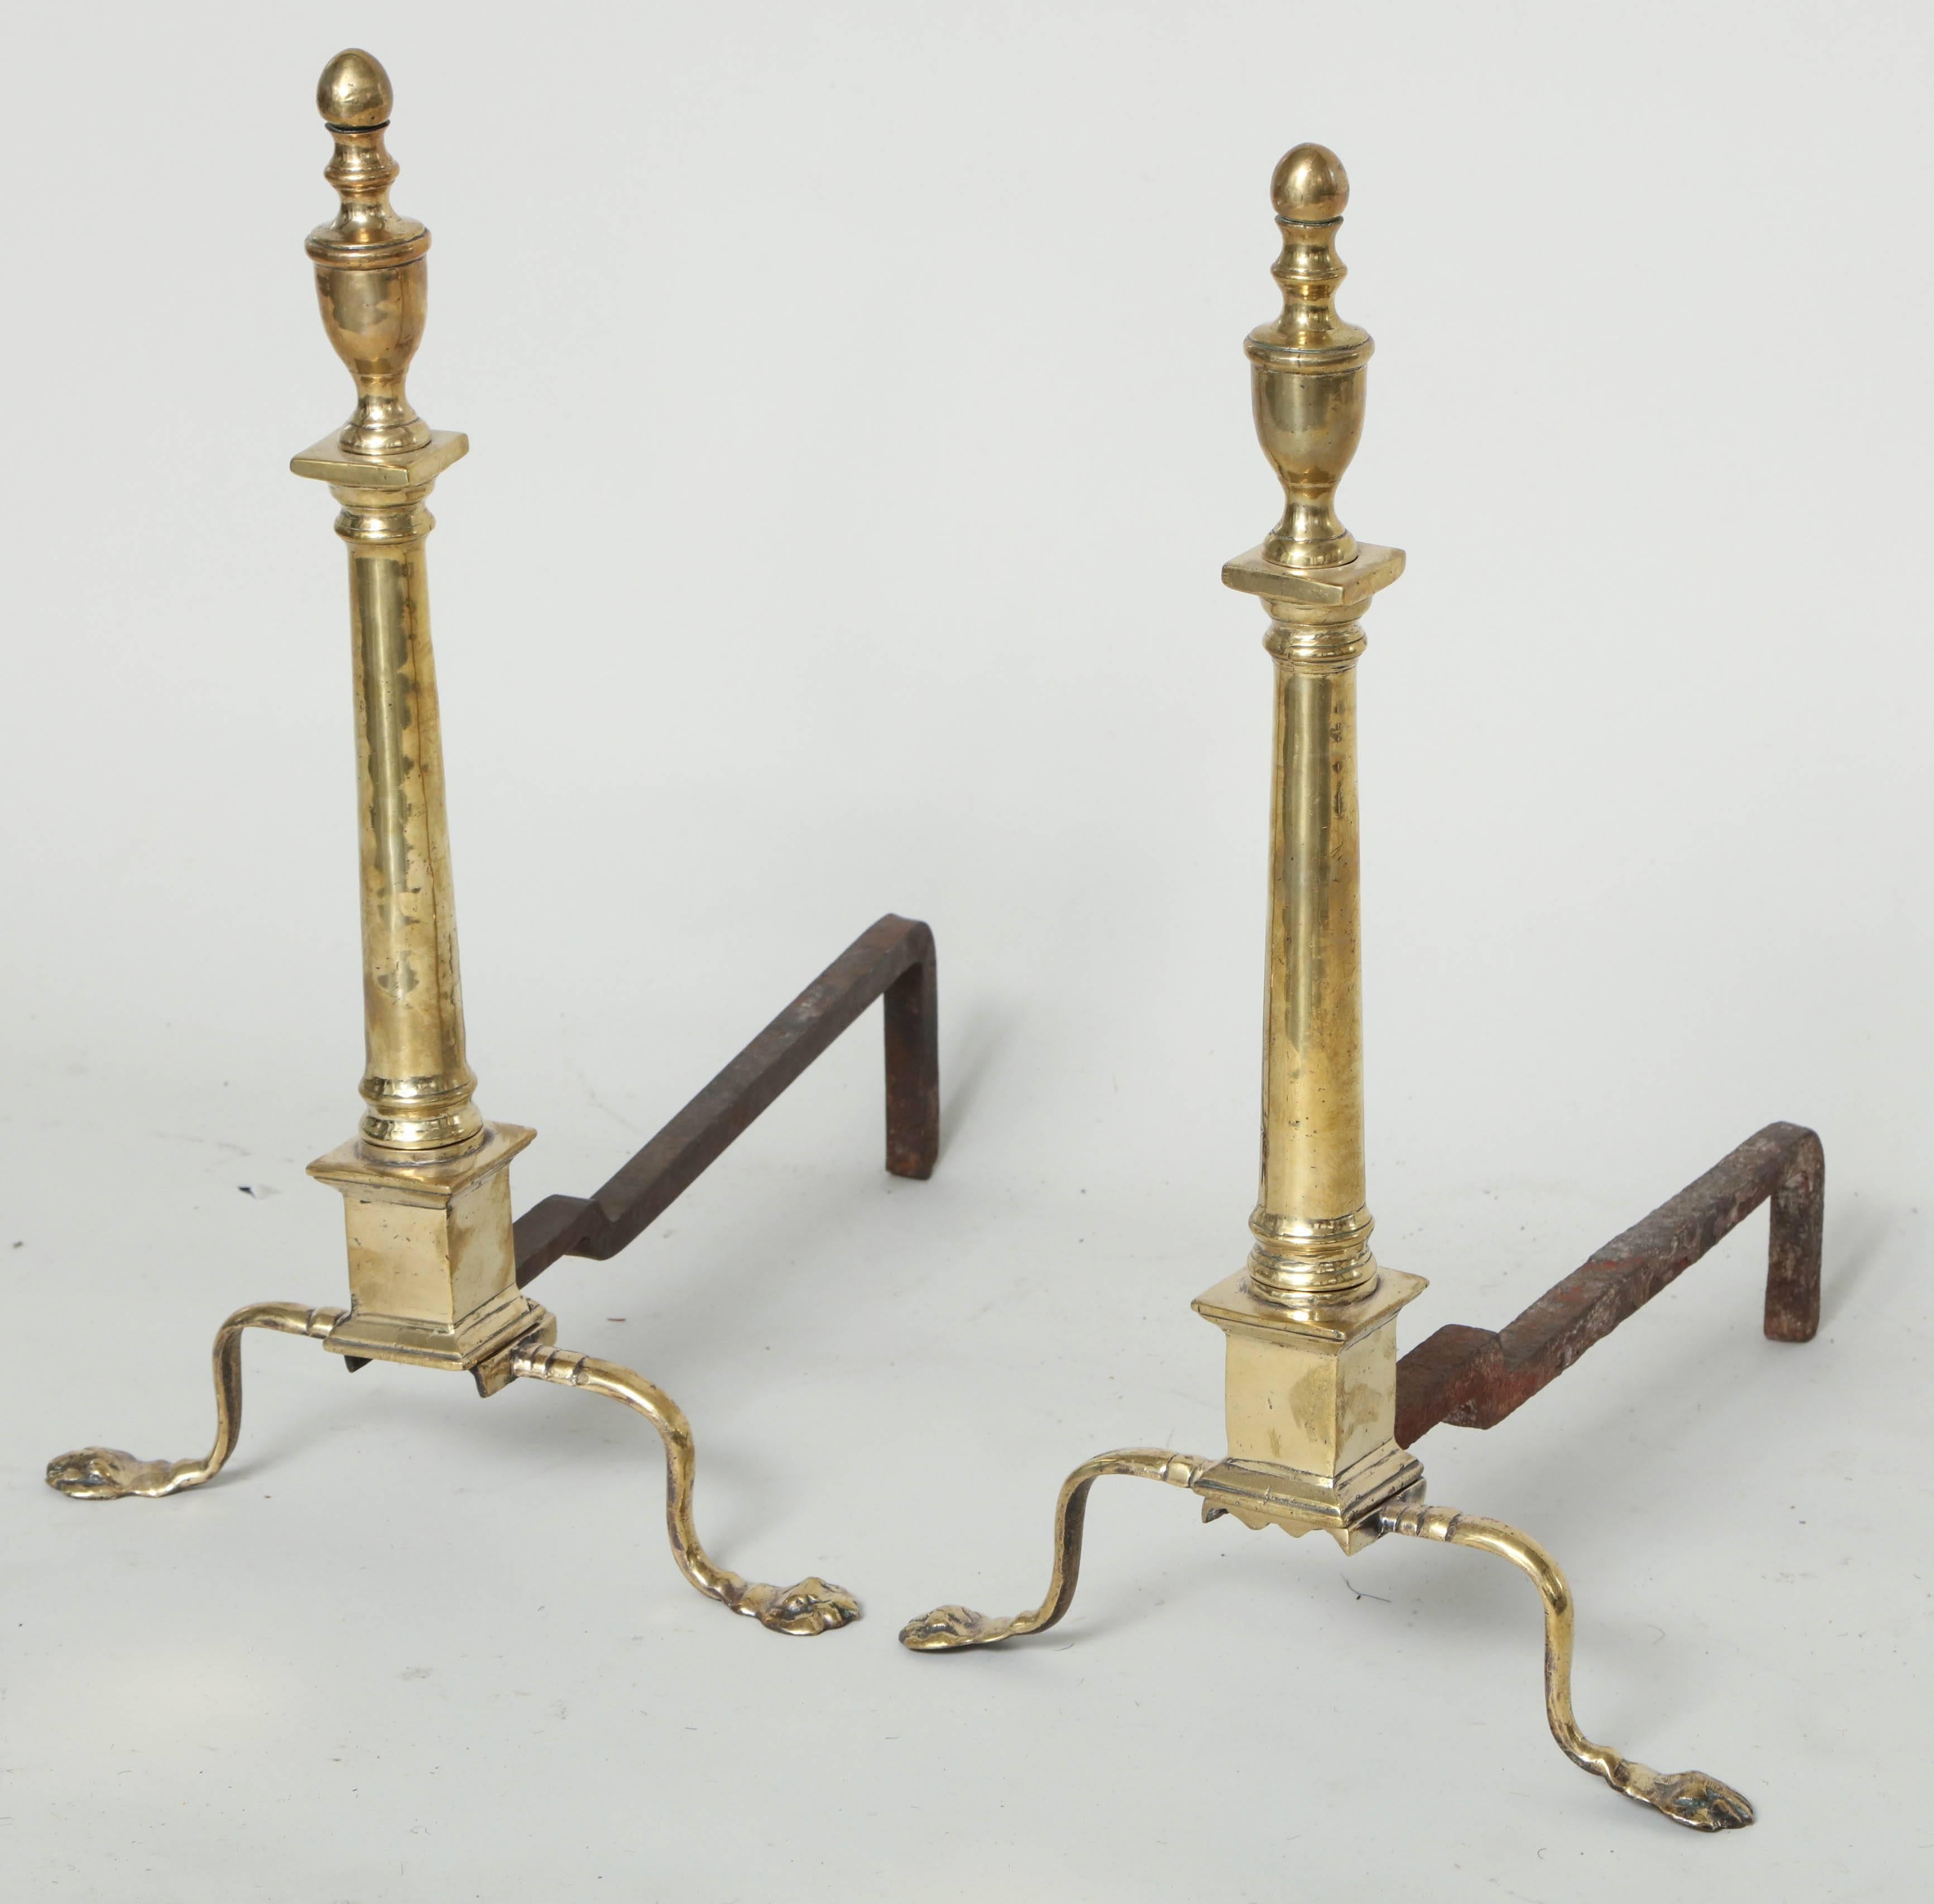 Good pair of late 19th century brass neoclassical andirons, the urn finial over column shaft standing on shaped legs ending in flattened paw feet.